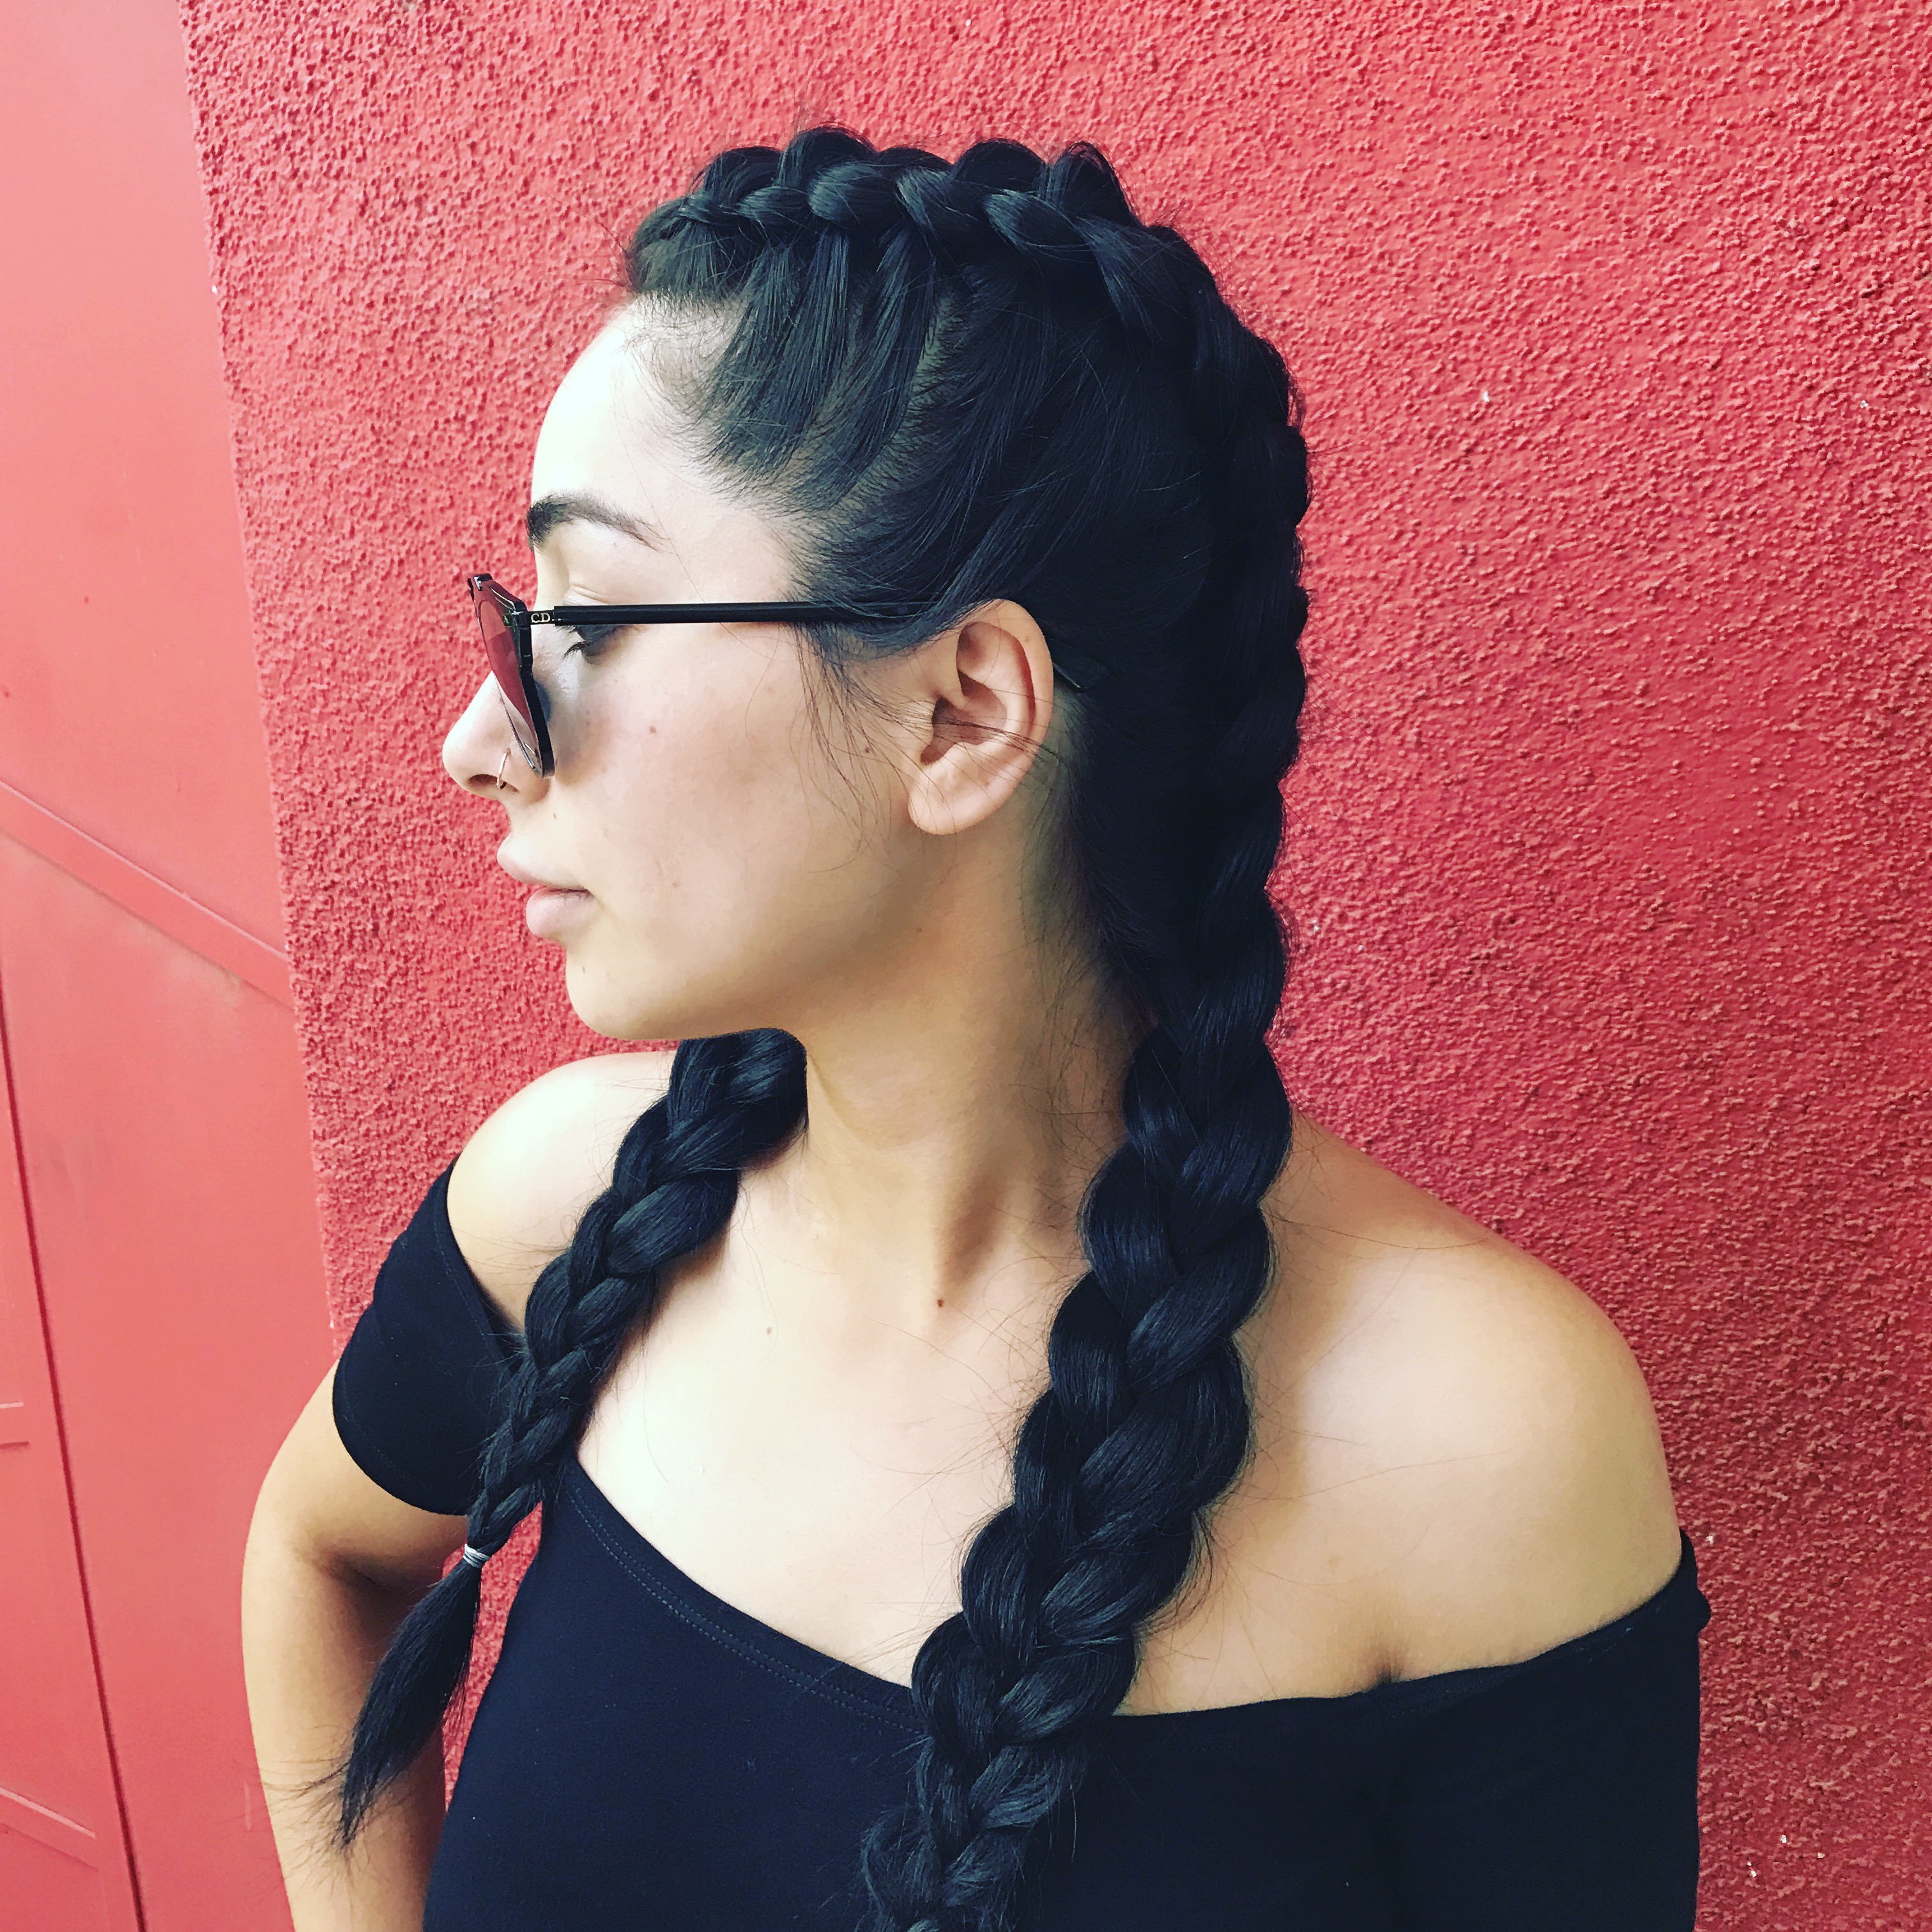 Festival-Ready Hairstyles You'll Want To Steal - Bangstyle - House of Hair  Inspiration